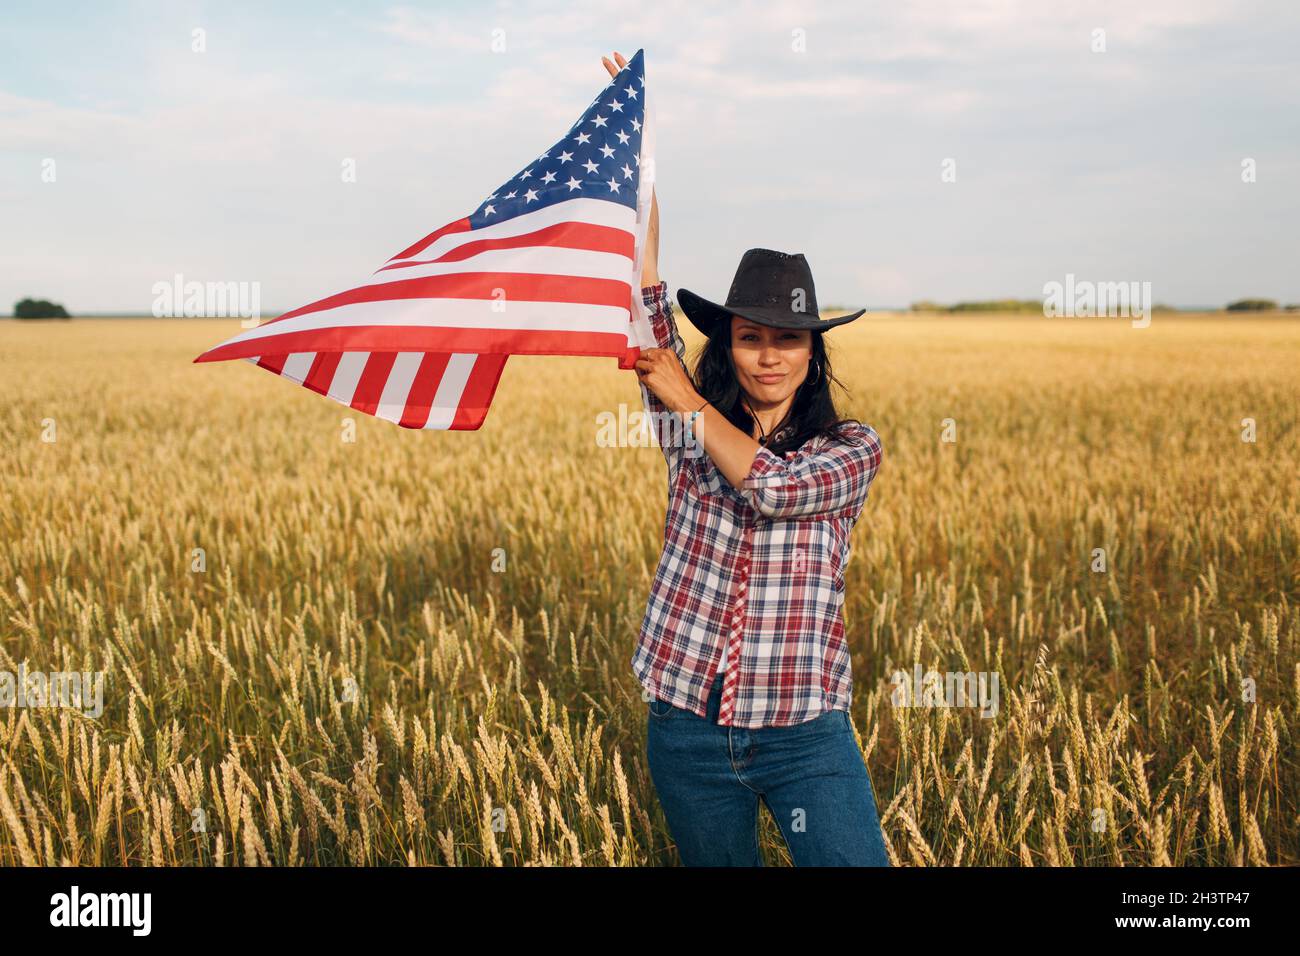 Woman farmer wearing cowboy hat, plaid shirt and jeans waving american flag at wheat field Stock Photo